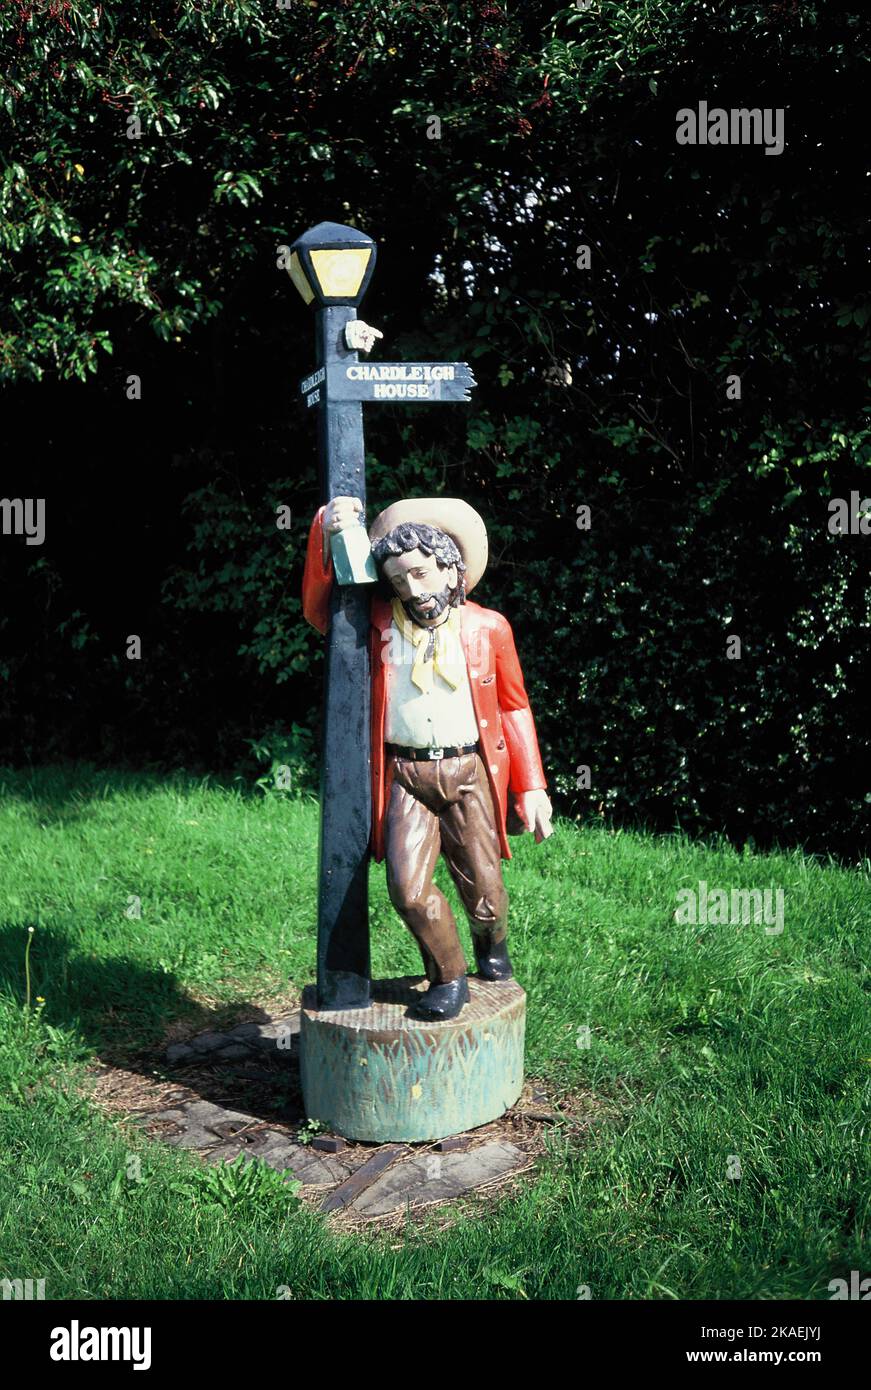 United Kingdom. England. Somerset. Chardleigh Green. Wadeford. Chard. 'The drunk' statue figure signpost to Chardleigh House. Stock Photo